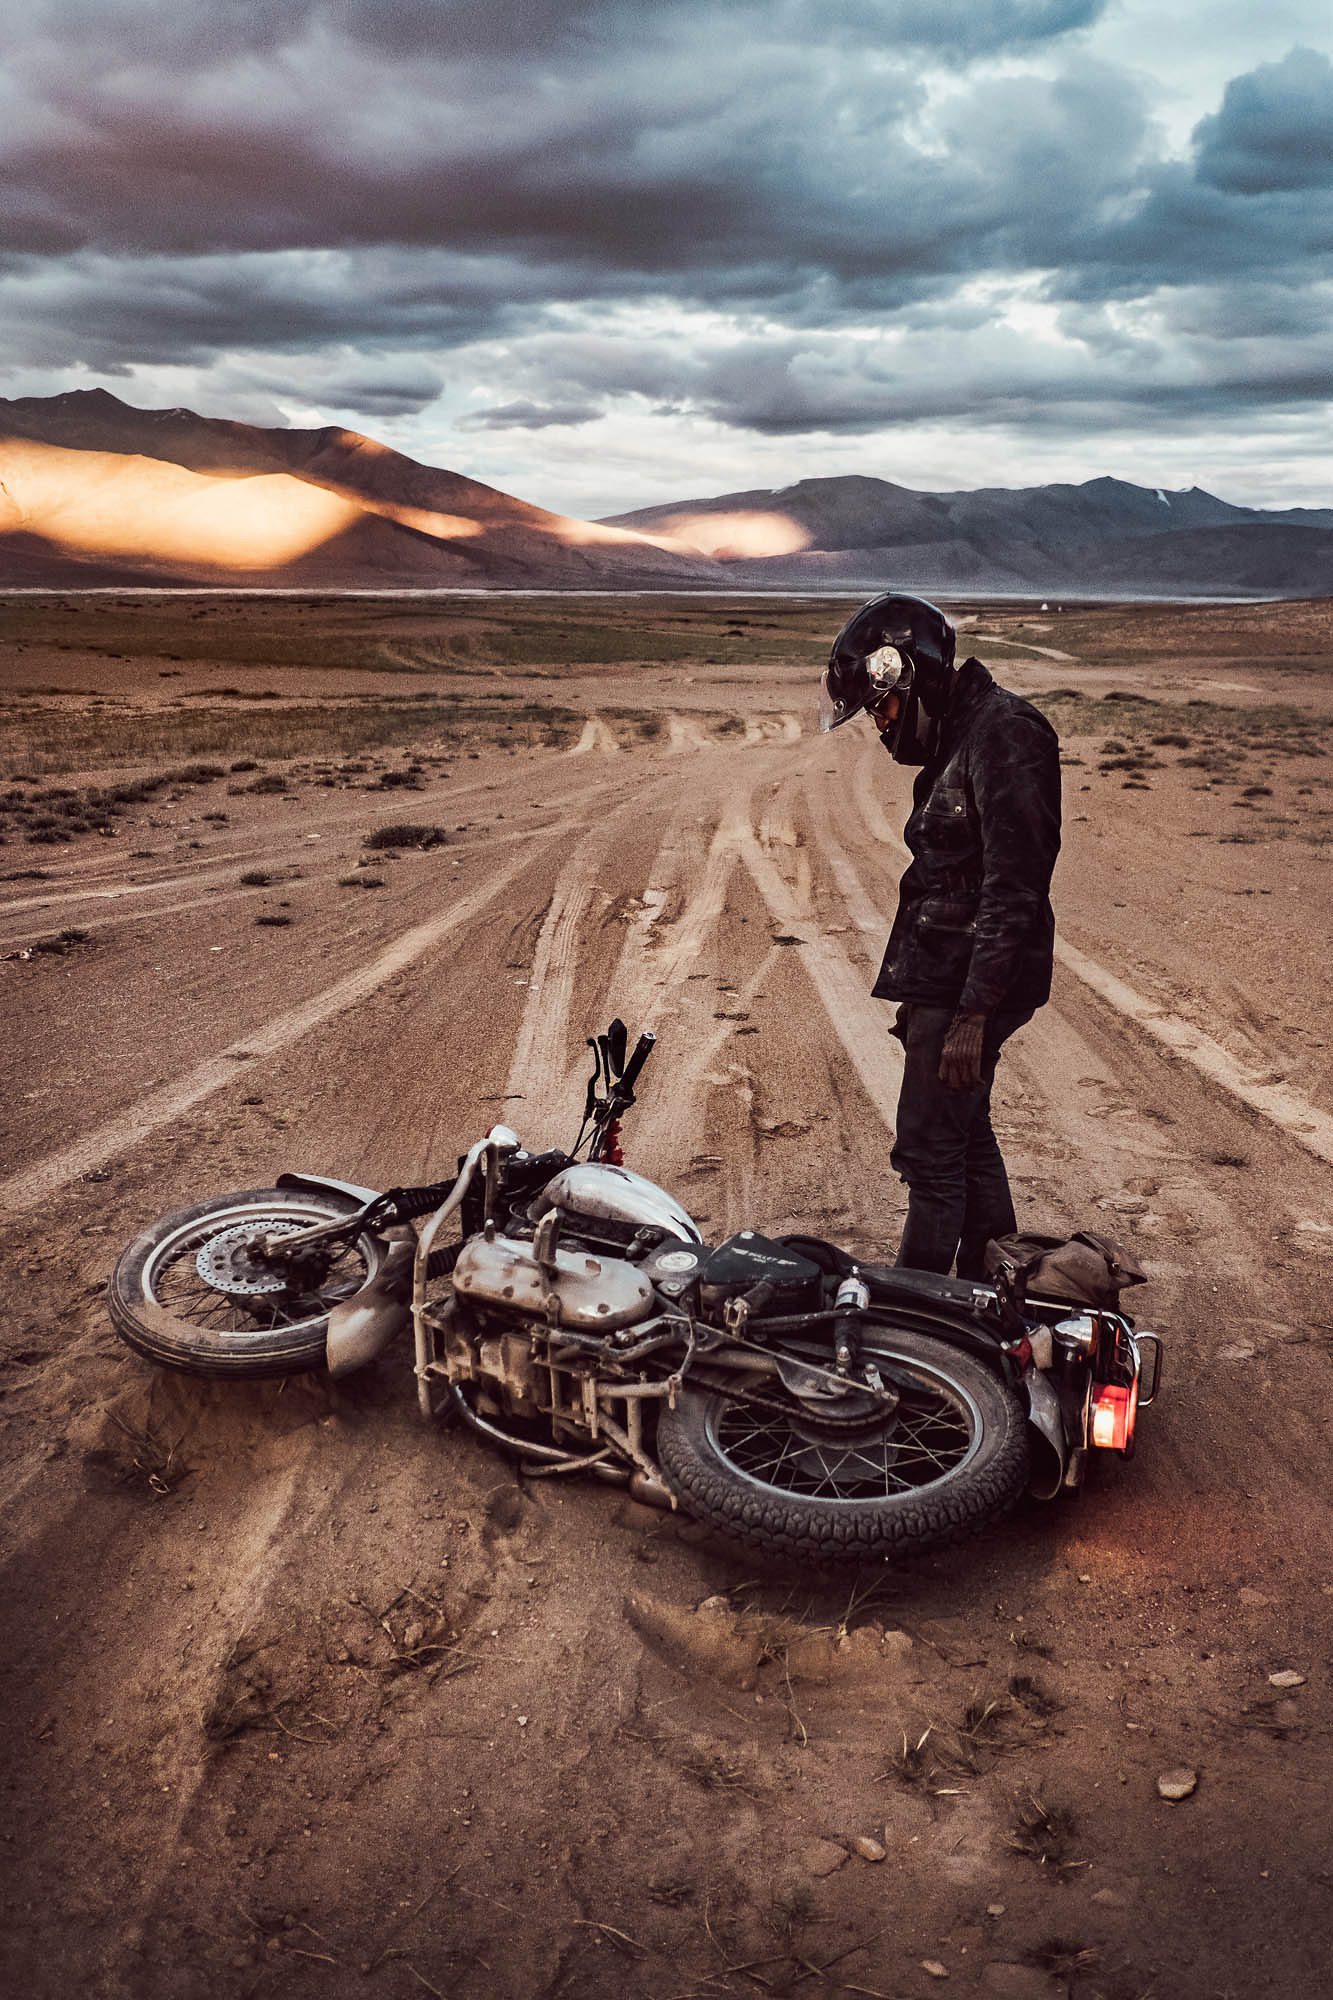 A motorcycle rider looks down at his fallen bike on a majestic road in the Rajasthan desert